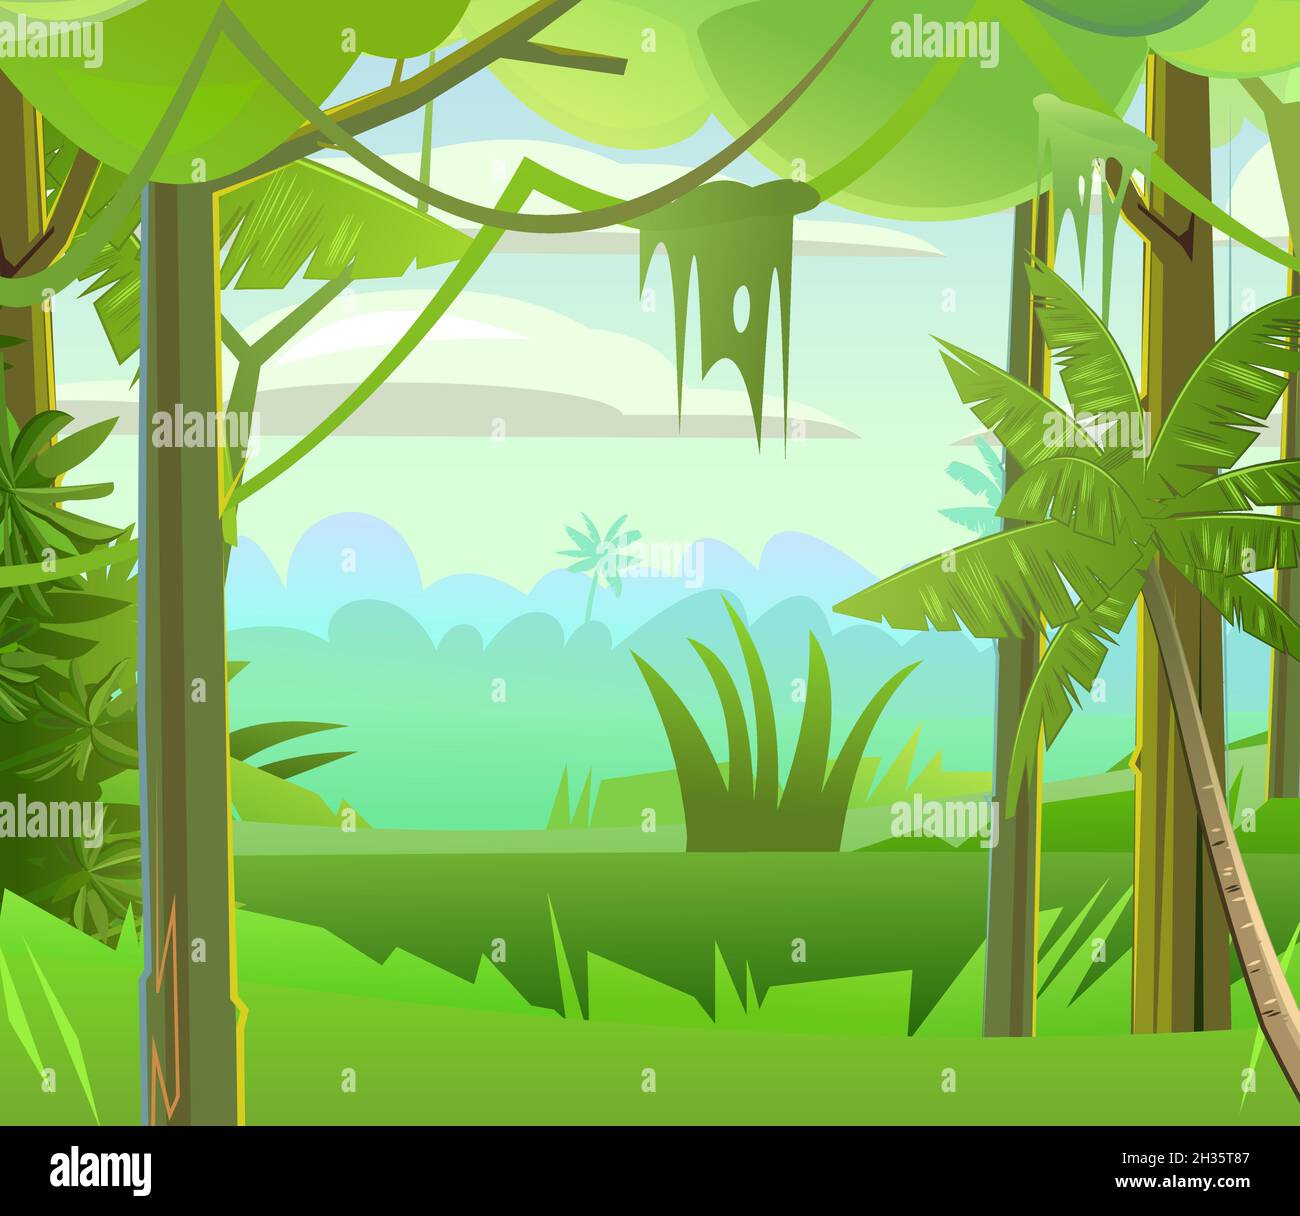 Jungle vines. Dense thickets. View from the forest. Southern Rural Scenery. Tropical forest panorama. Illustration in cartoon style flat design Stock Vector